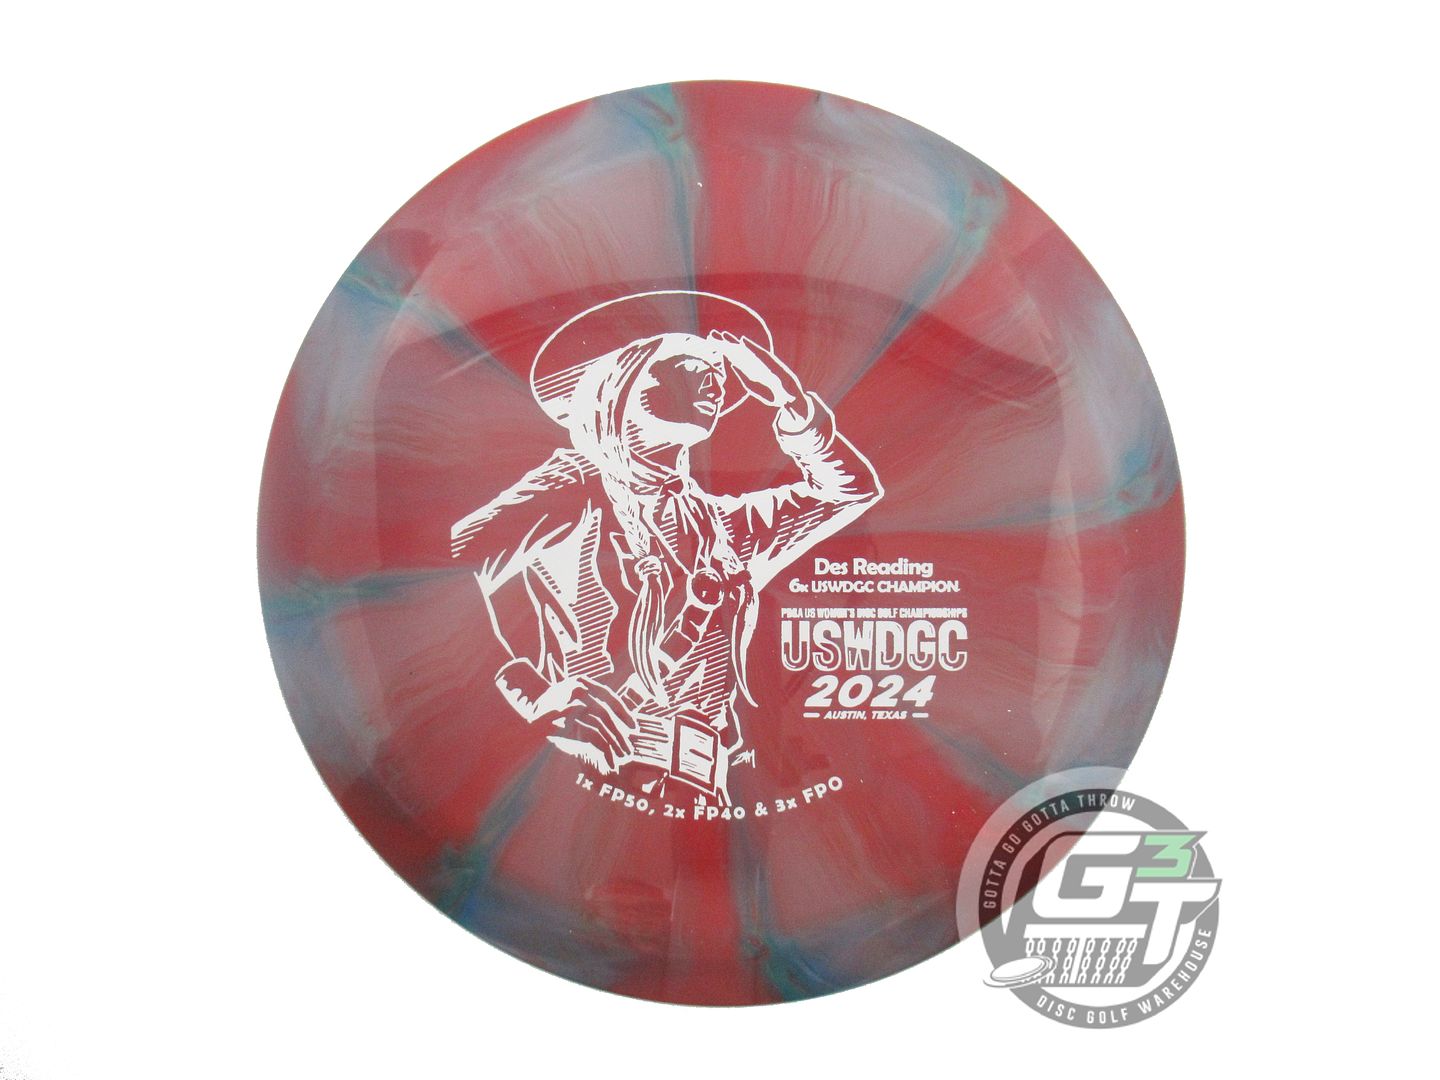 Mint Discs Limited Edition Des Reading 6X USWDGC Champion Stamp Swirly Sublime Freetail Distance Driver Golf Disc (Individually Listed)